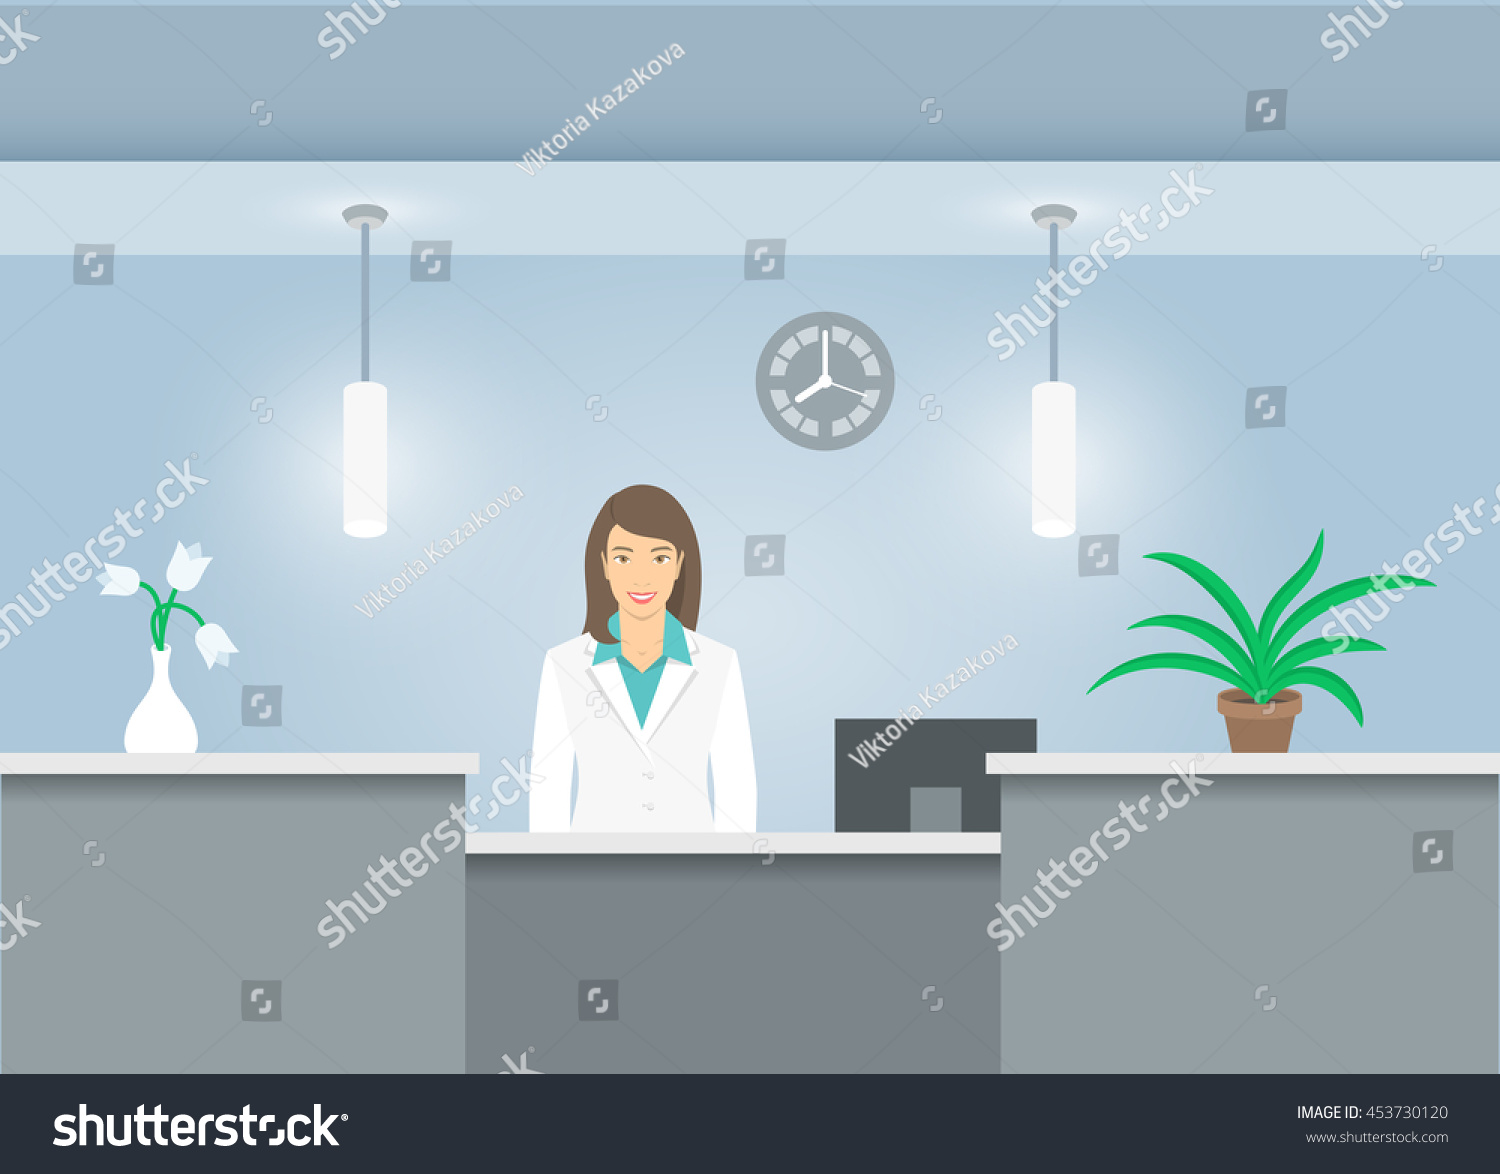 Woman Receptionist Medical Coat Stands Reception Stock Vector Royalty Free 453730120 3058